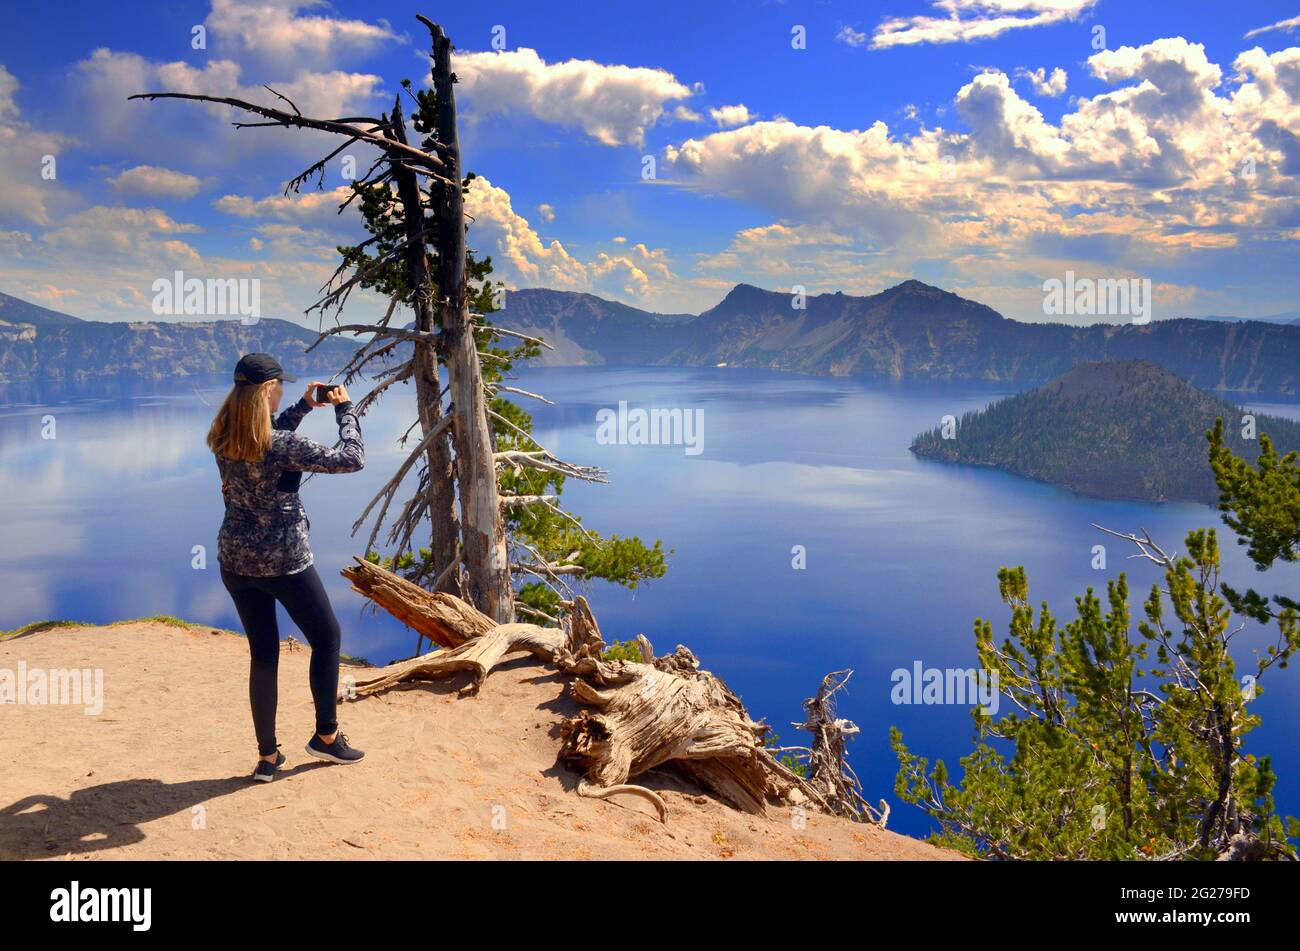 USA NATIONAL PARKS; CRATER LAKE, OREGON; DEEPEST LAKE IN USA; WIZARD ISLAND (MODEL RELEASED) Stock Photo